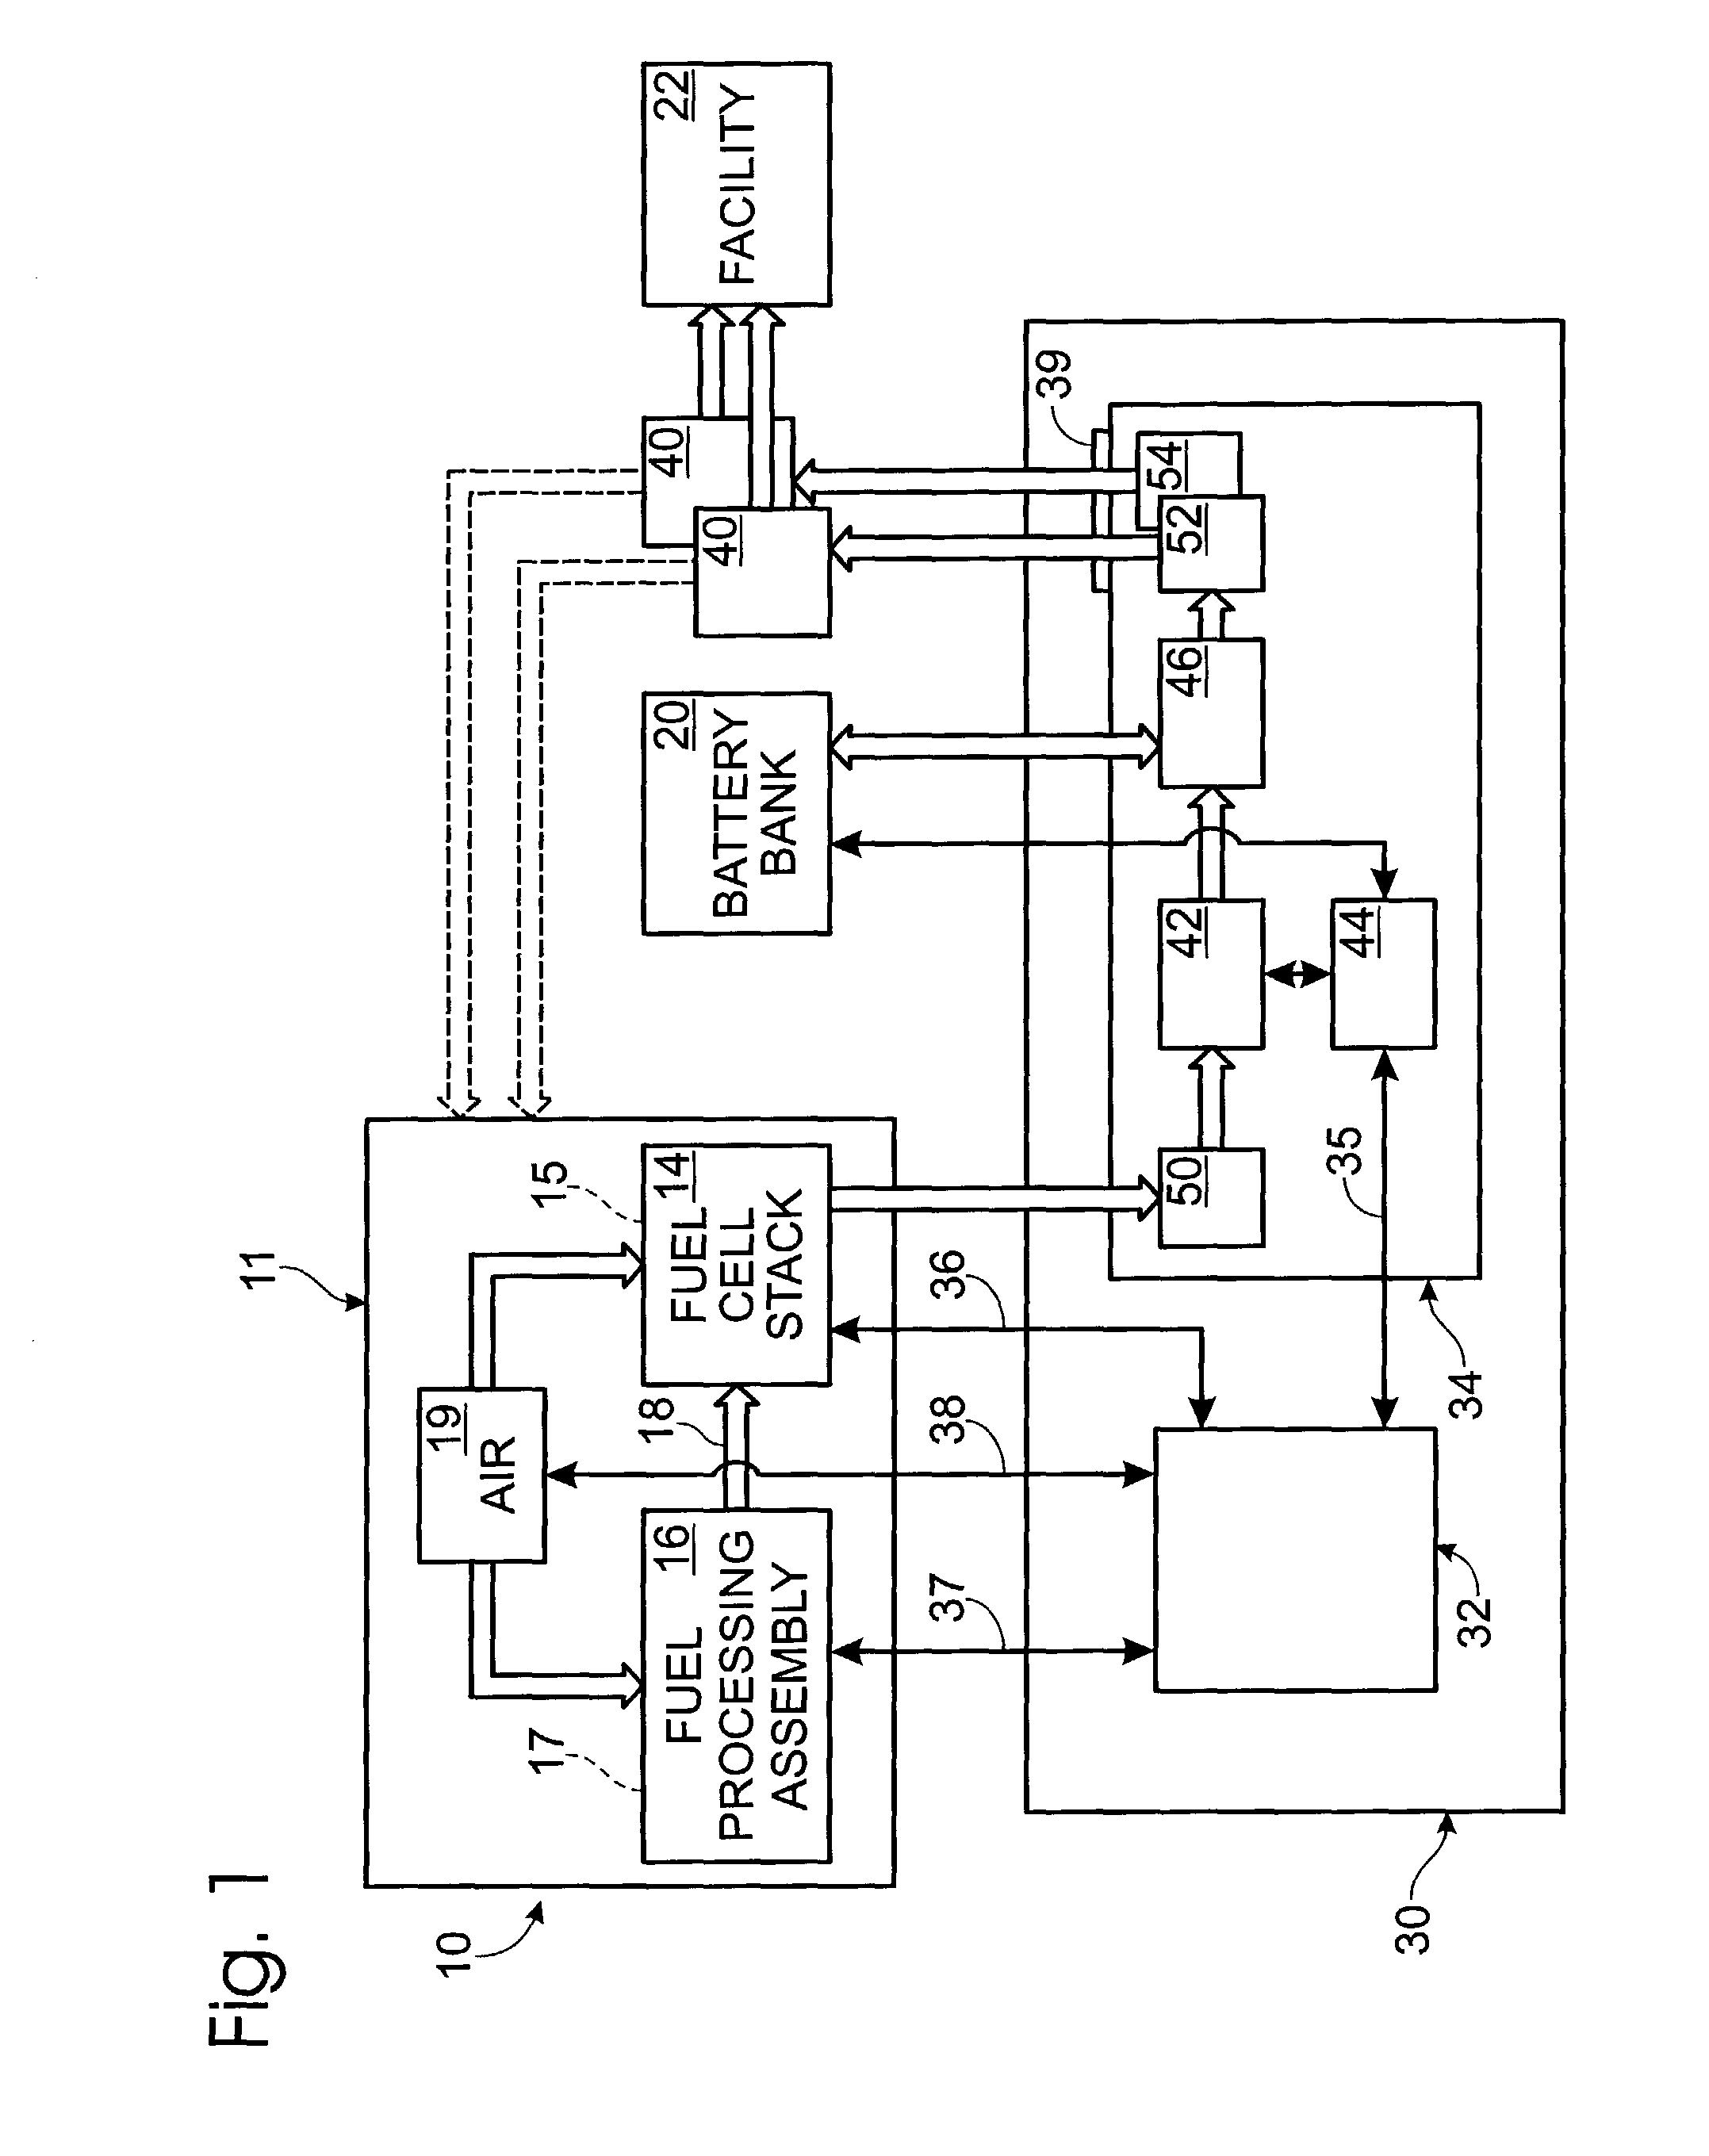 Fuel cell system controller